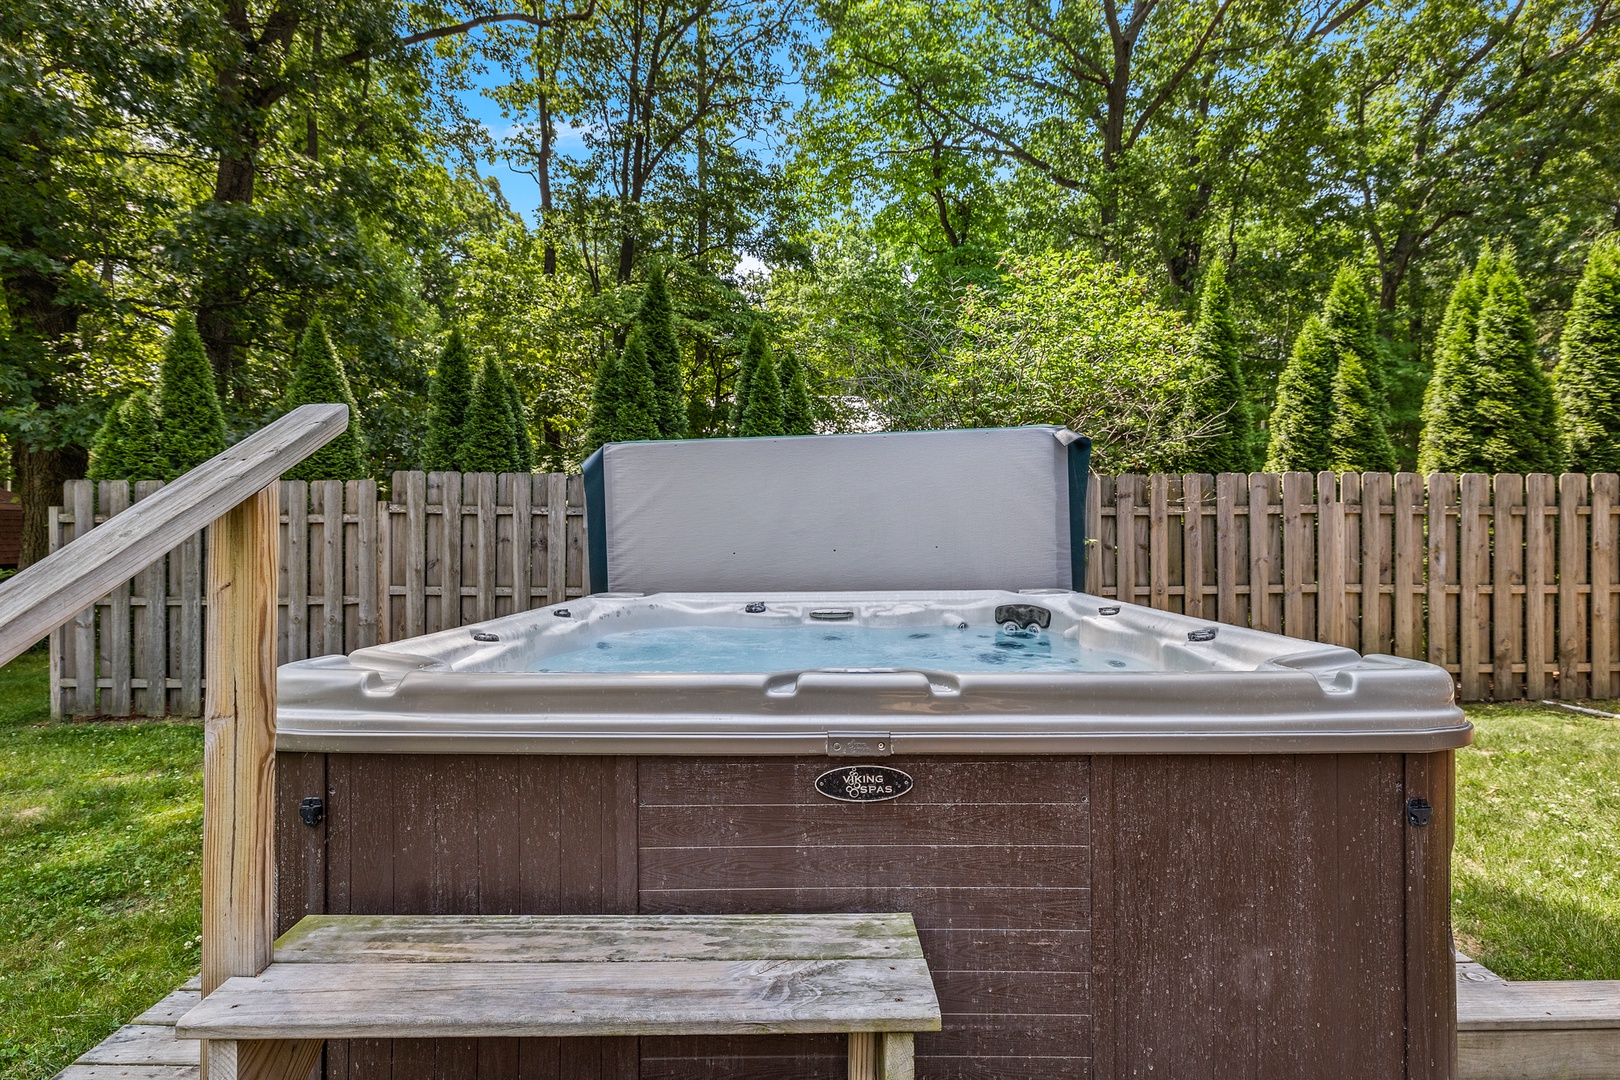 Relax your cares away in the 8-person hot tub.